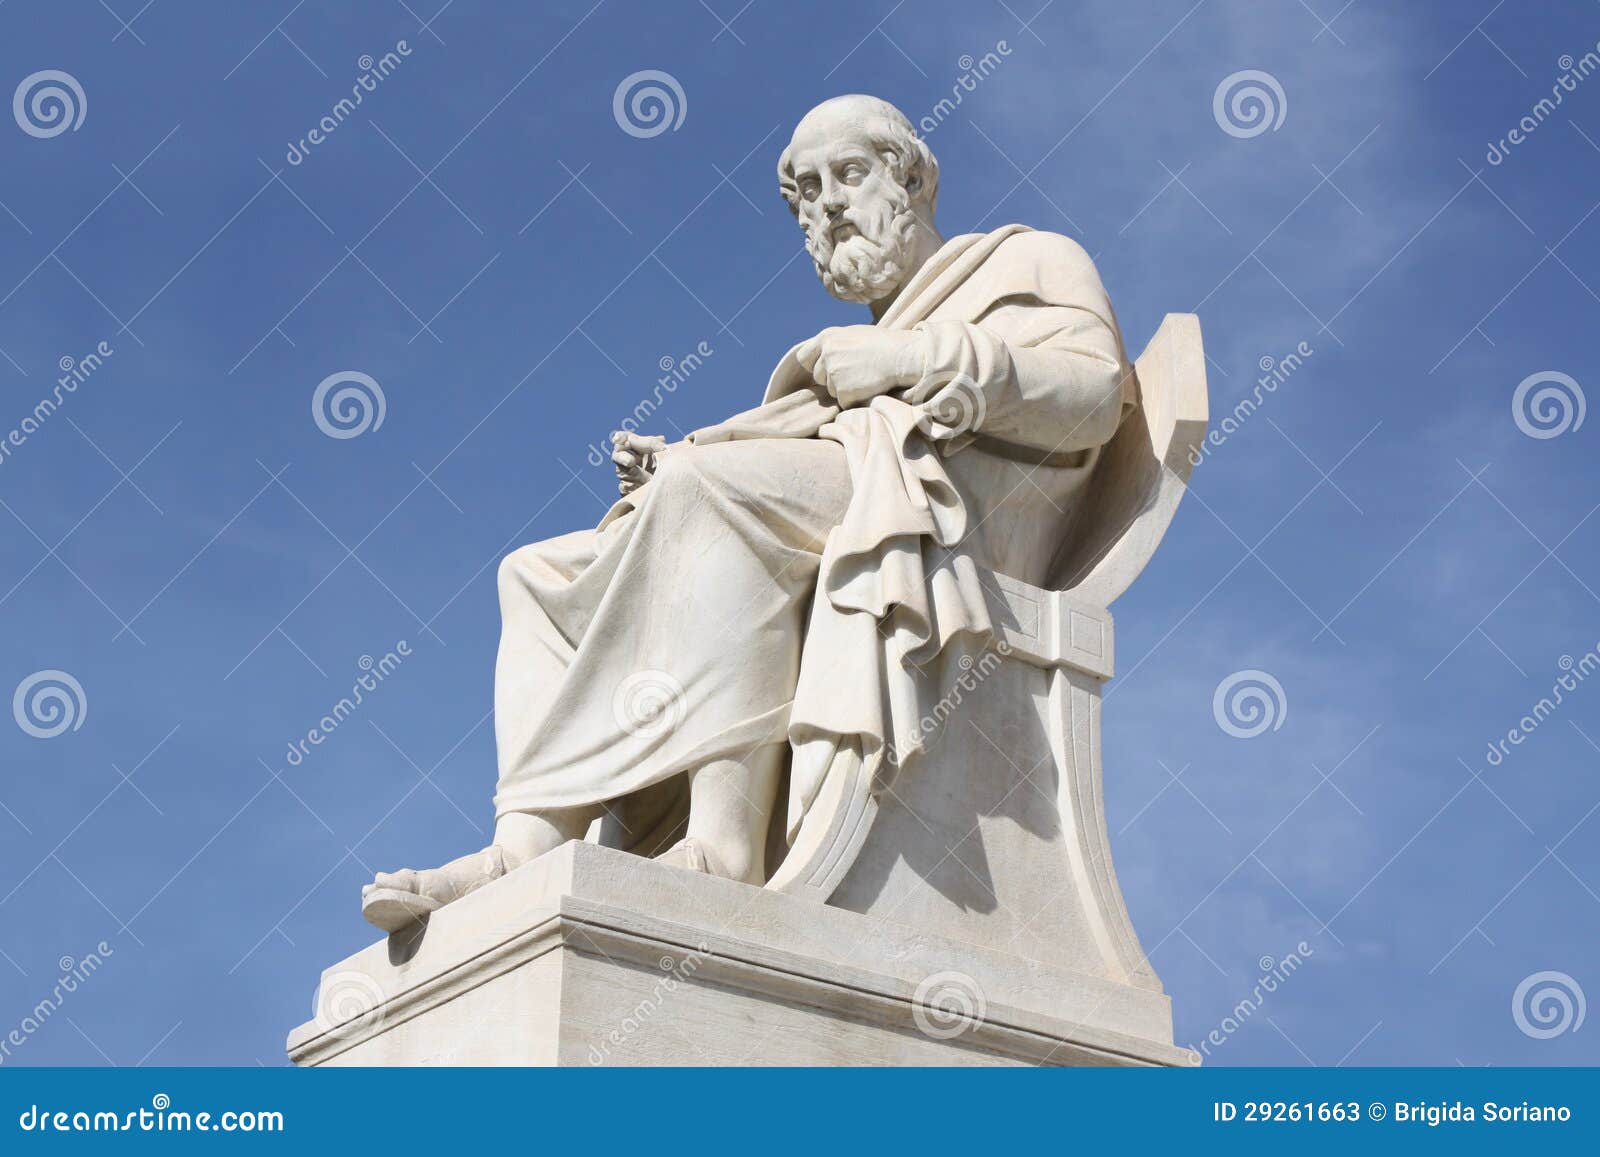 statue of philosopher plato in athens, greece